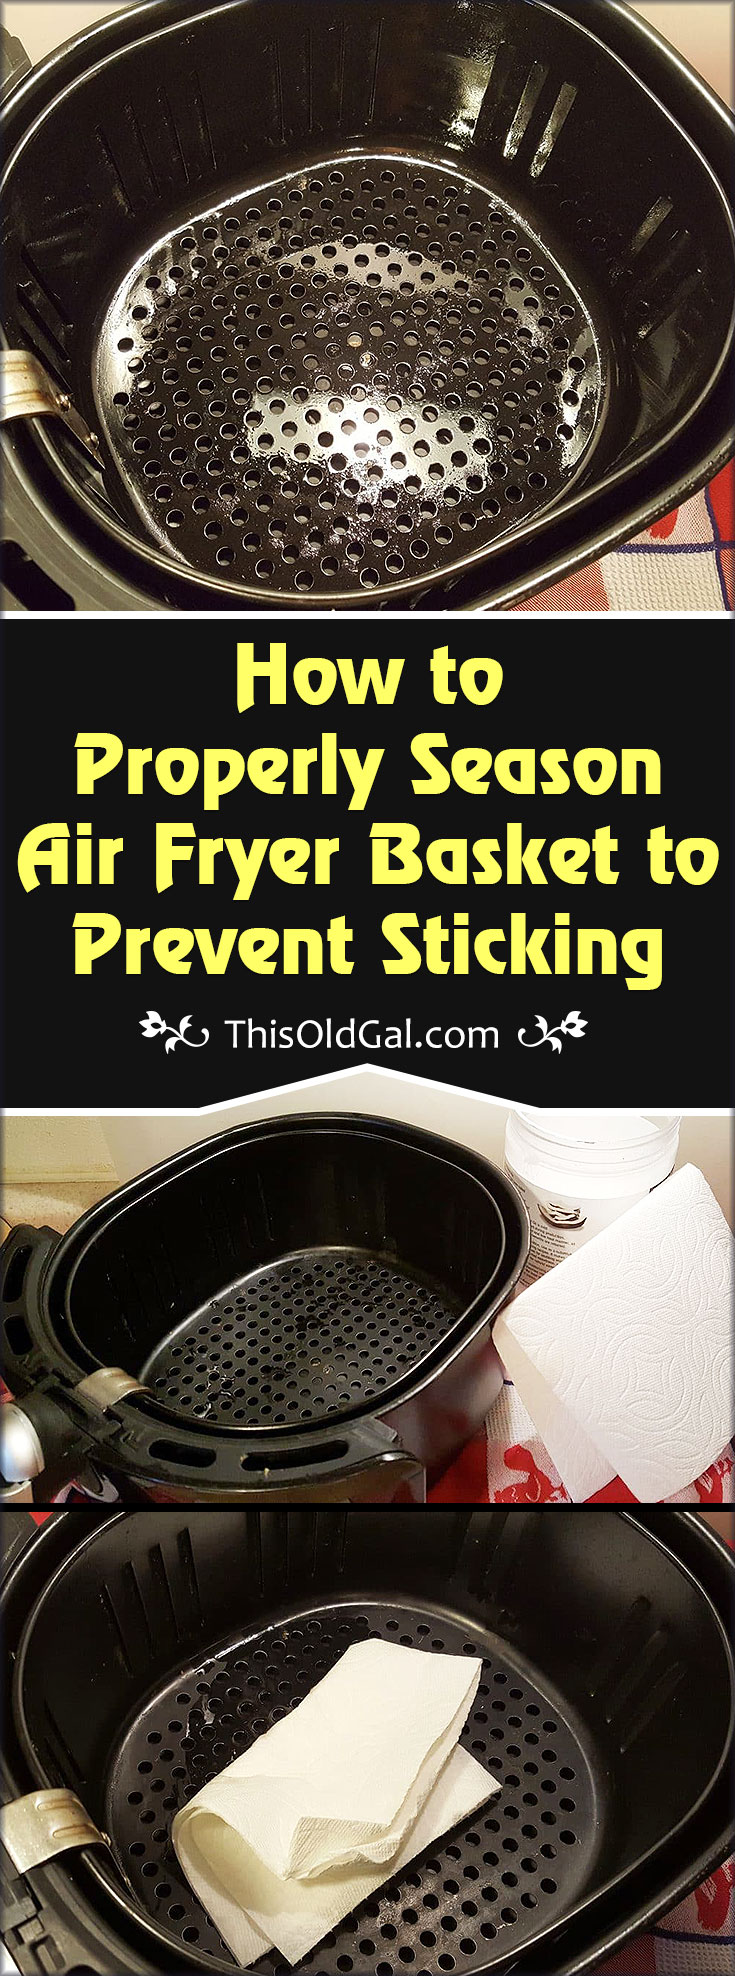 How to Properly Season Air Fryer Basket to Prevent Sticking